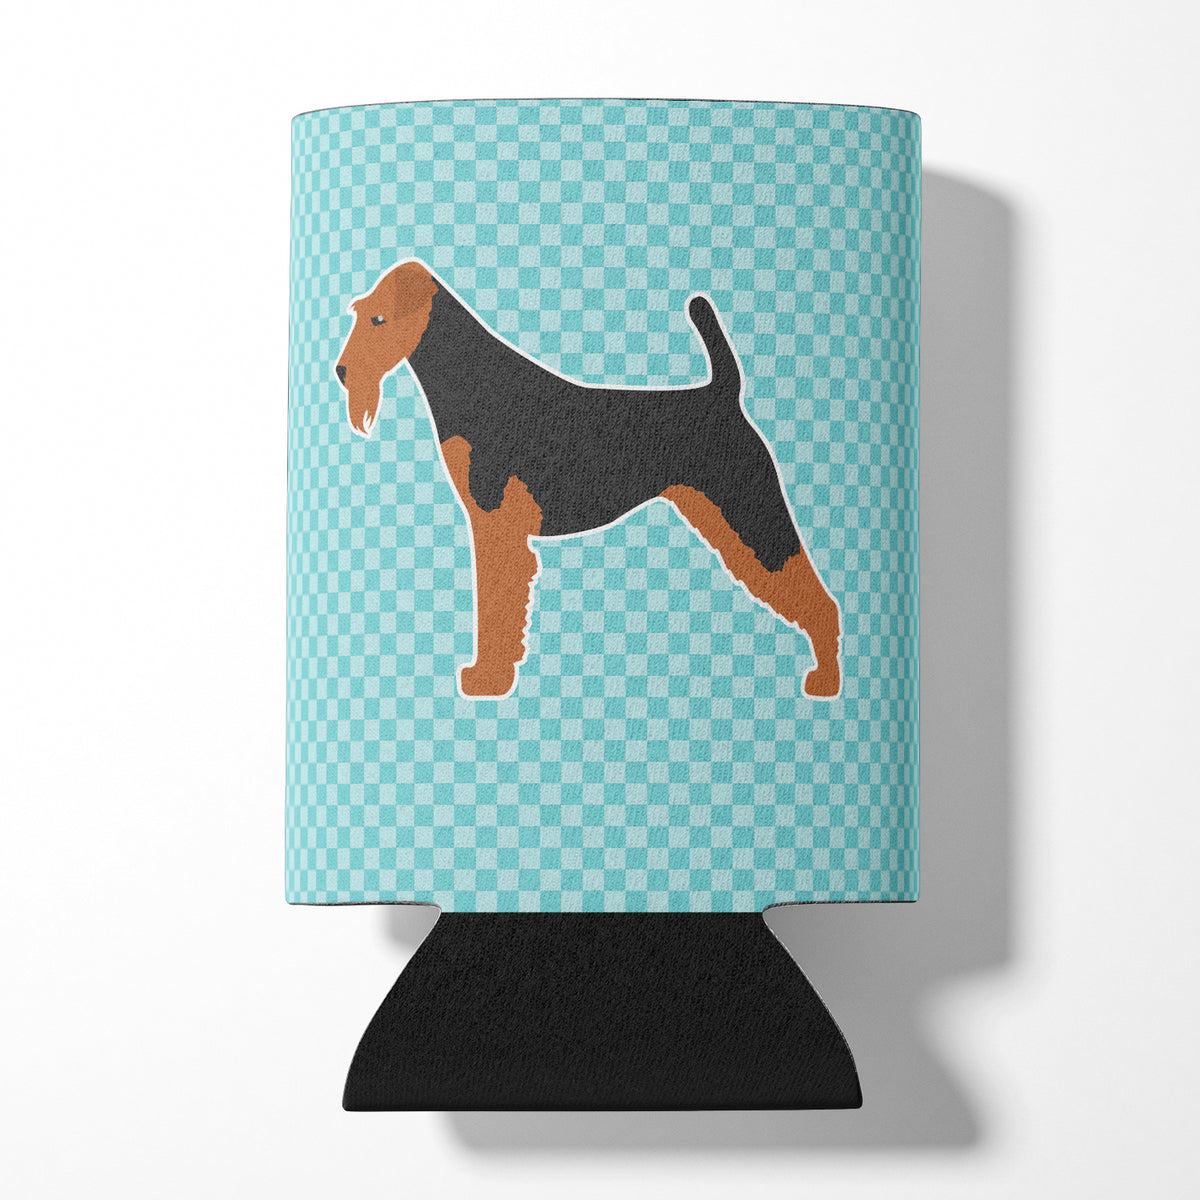 Airedale Terrier Checkerboard Blue Can or Bottle Hugger BB3757CC